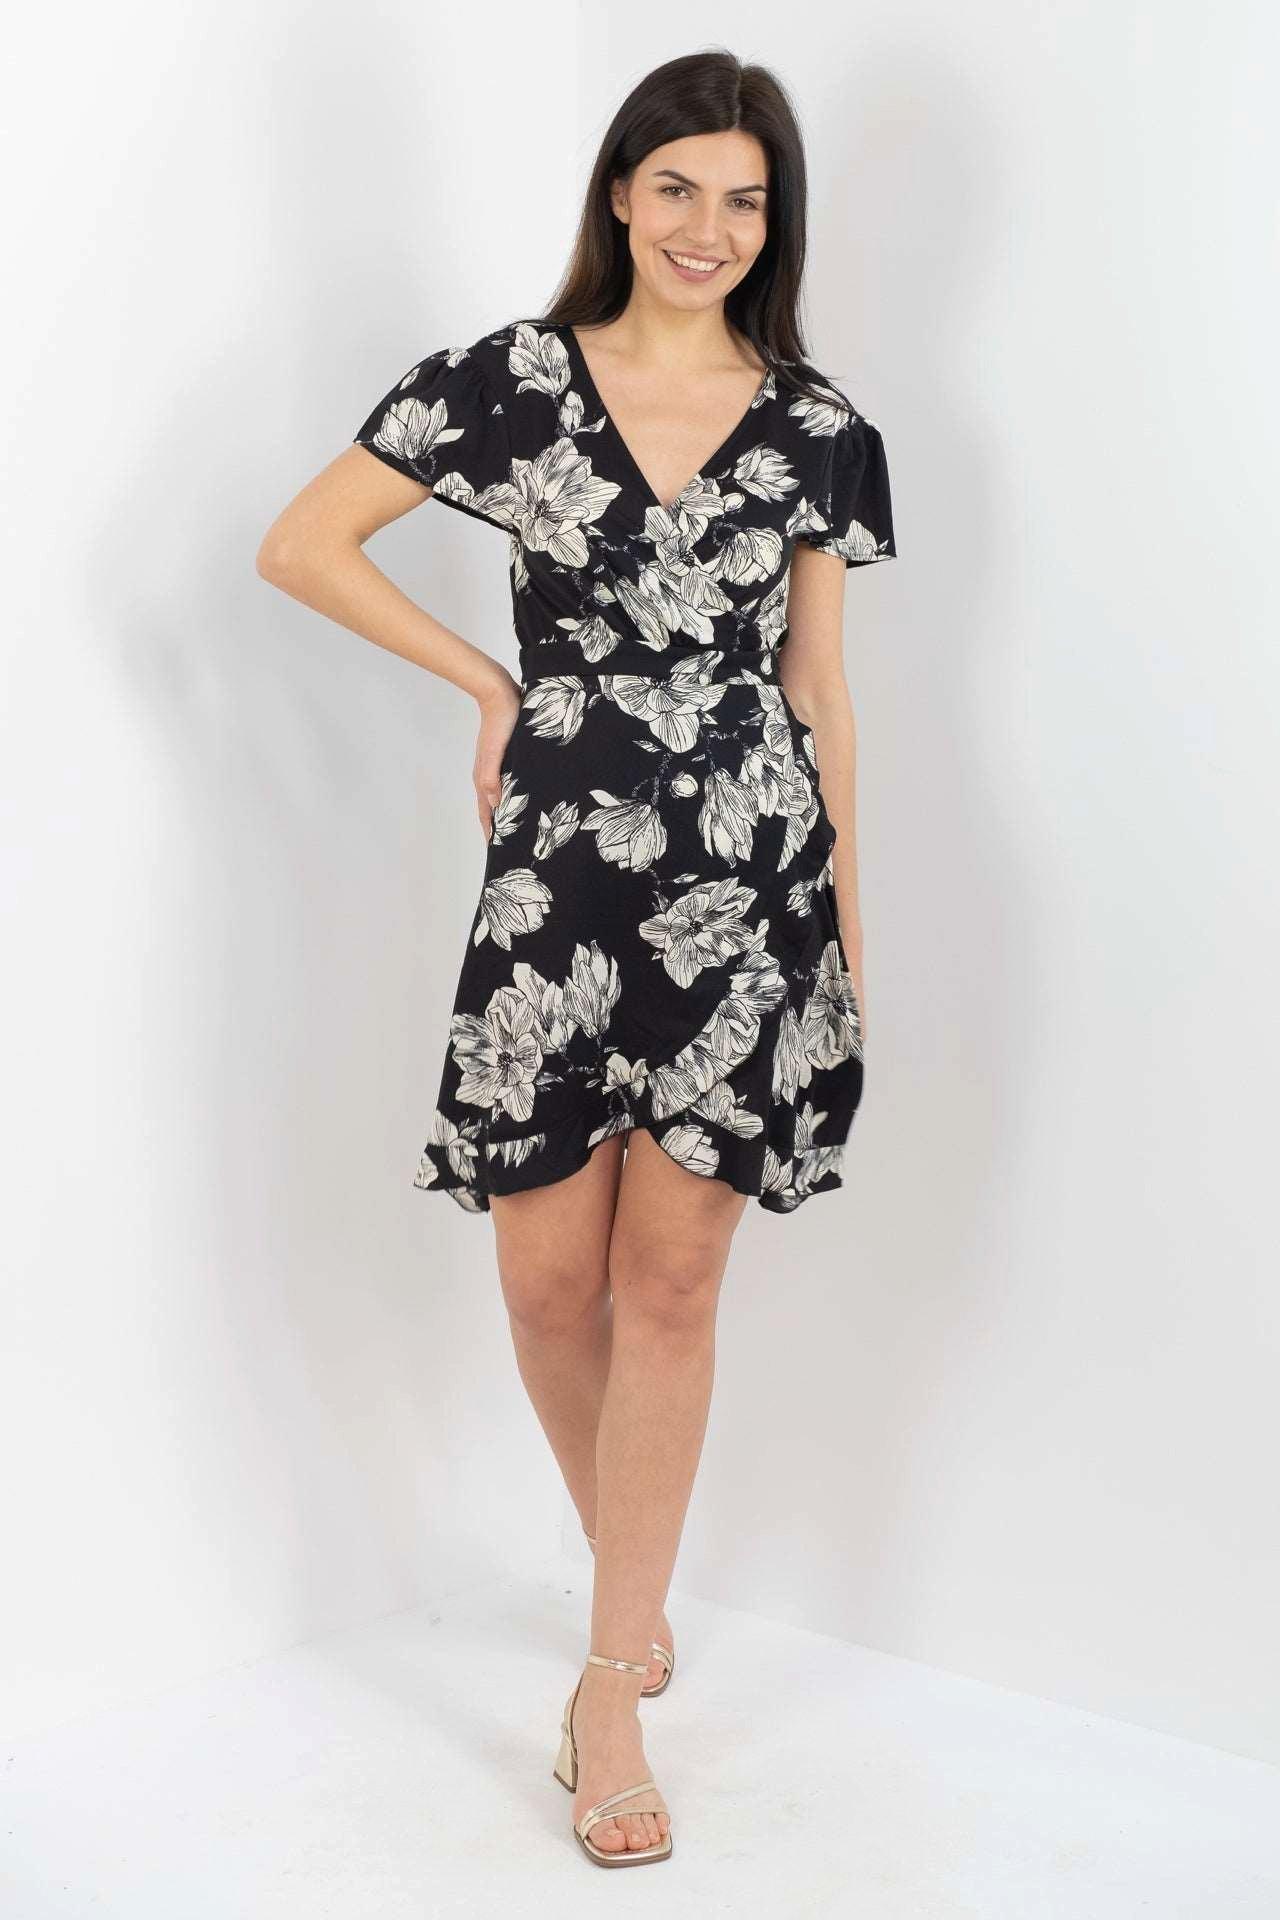 Page Short Wrap Dress in Black